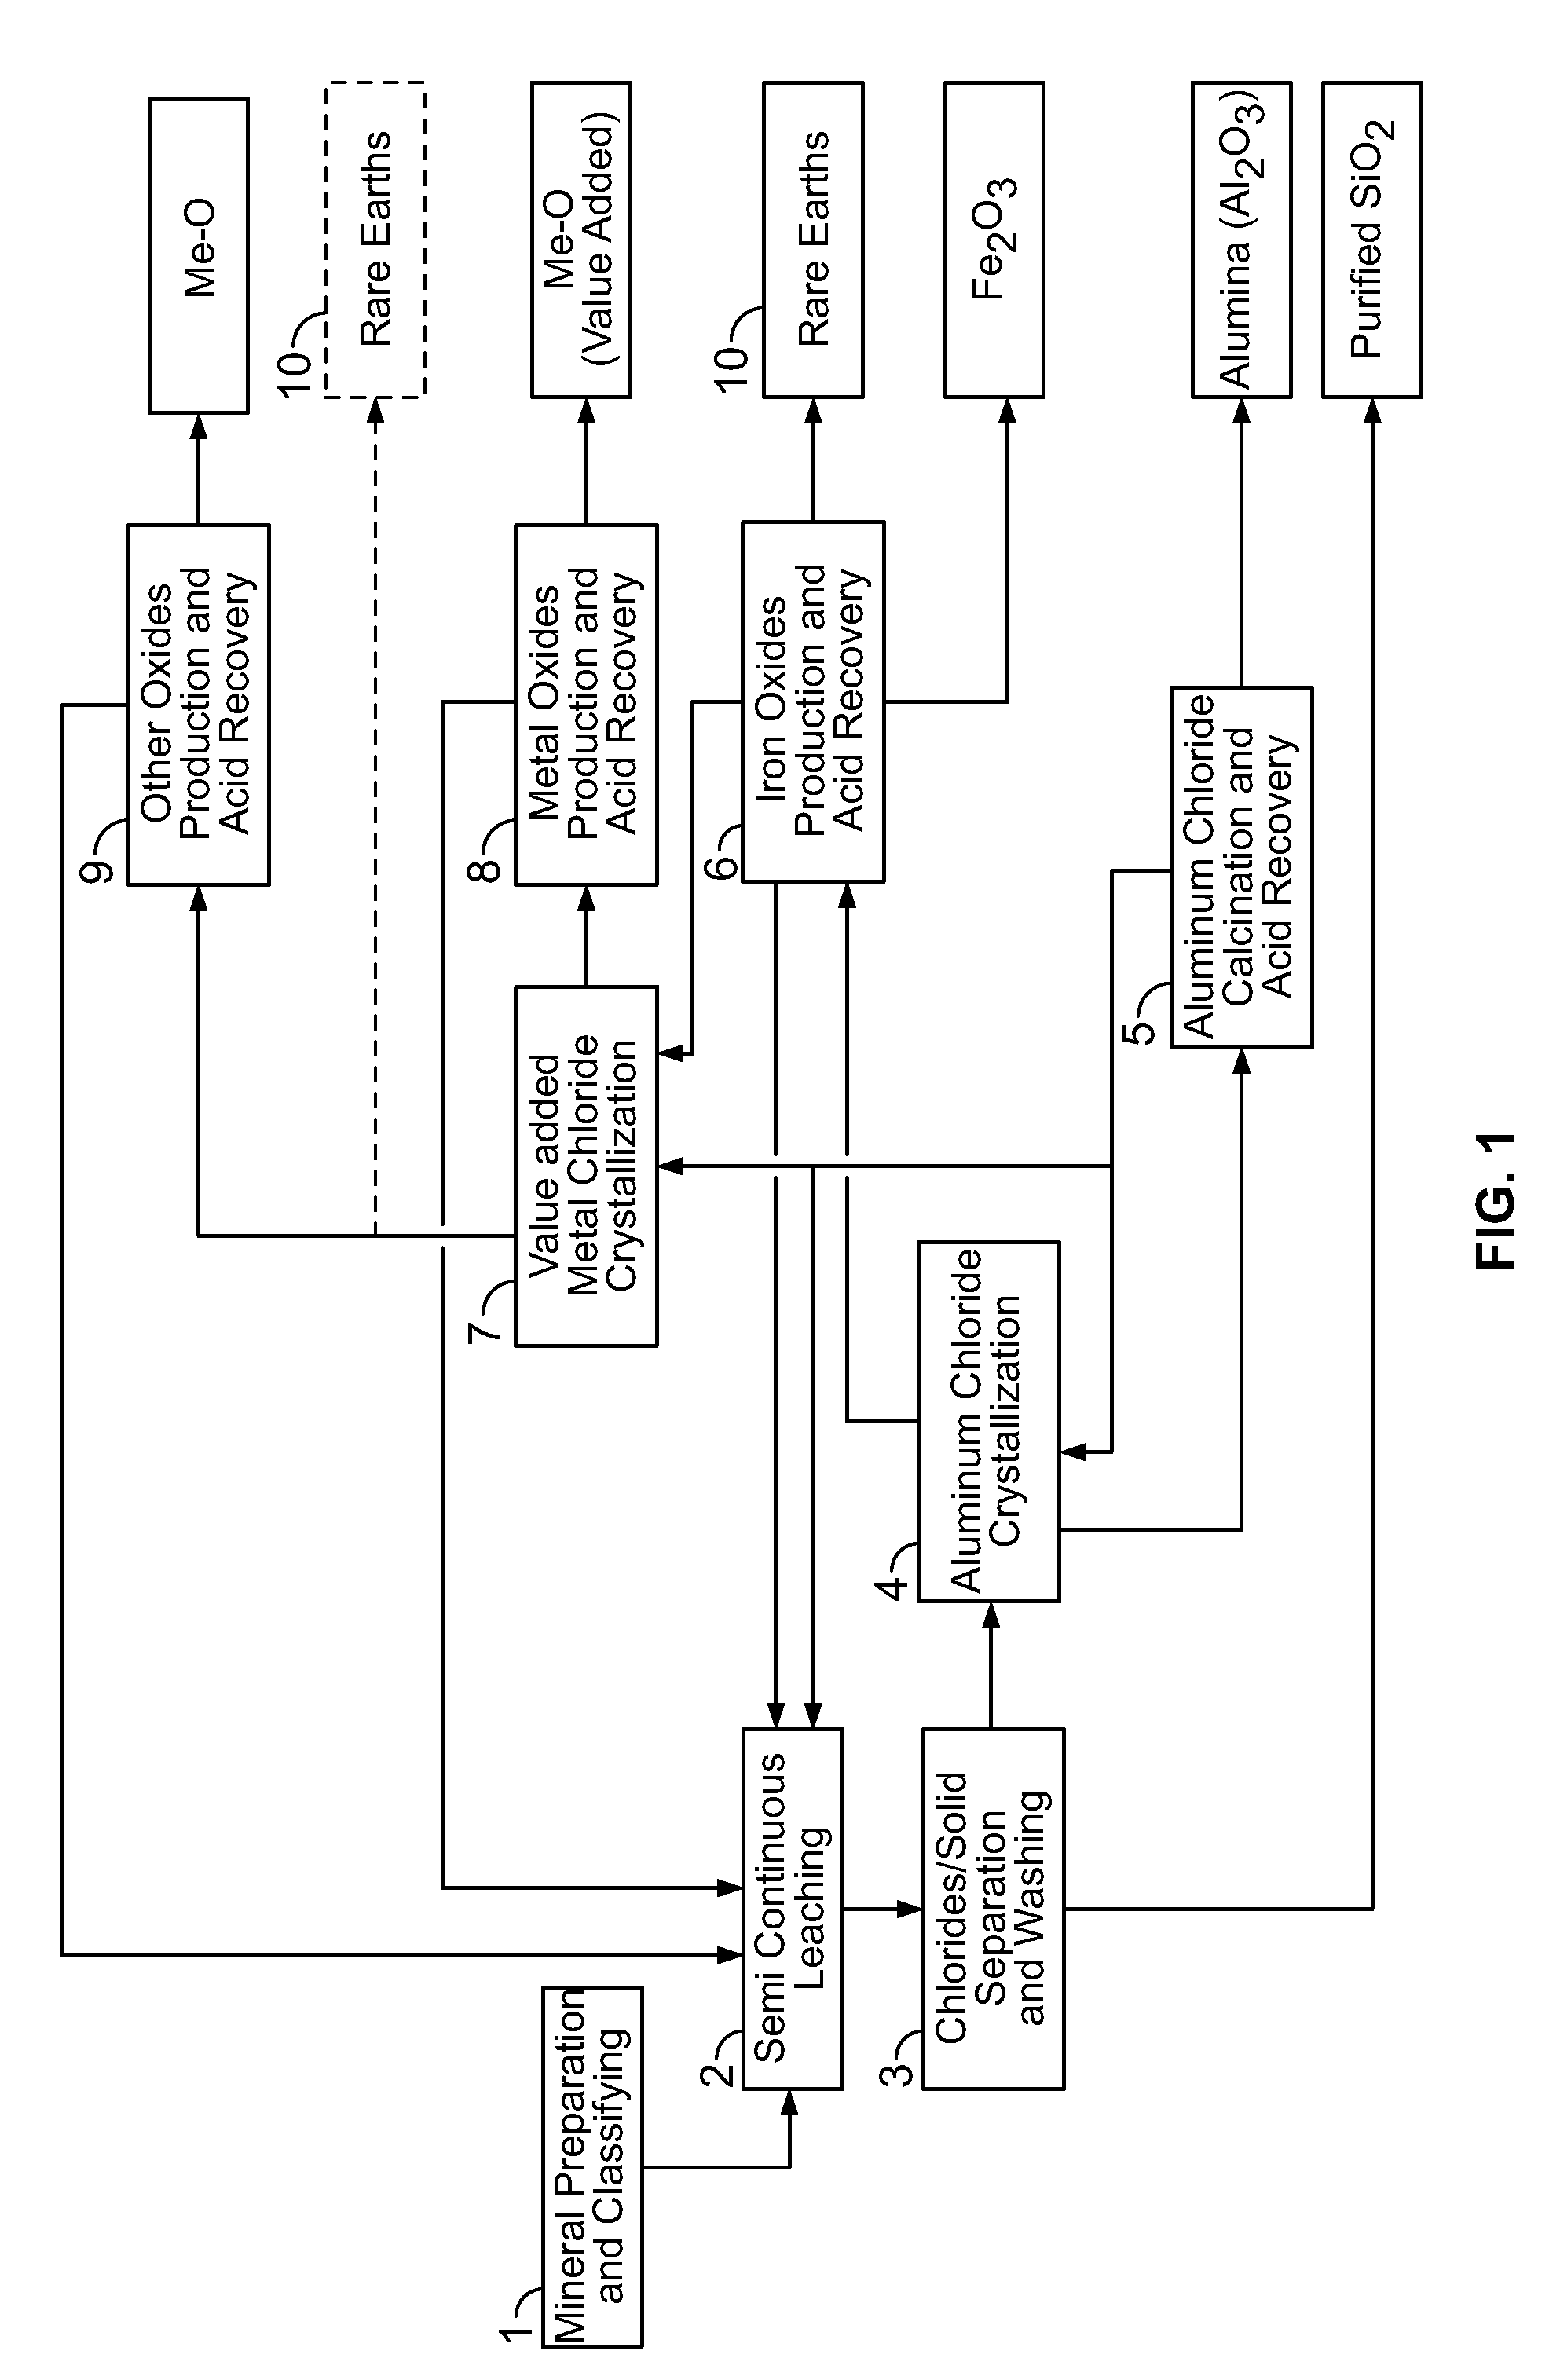 Processes for preparing alumina and various other products